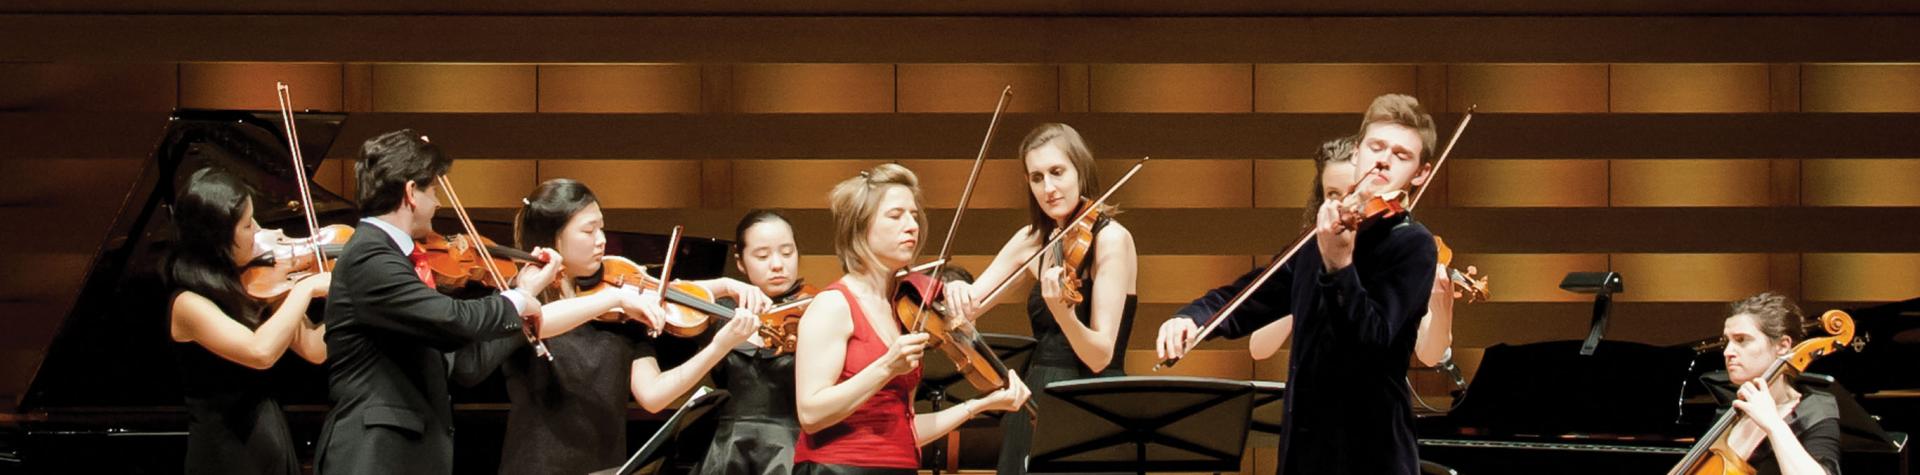 Donate Now - students performing in Koerner Hall